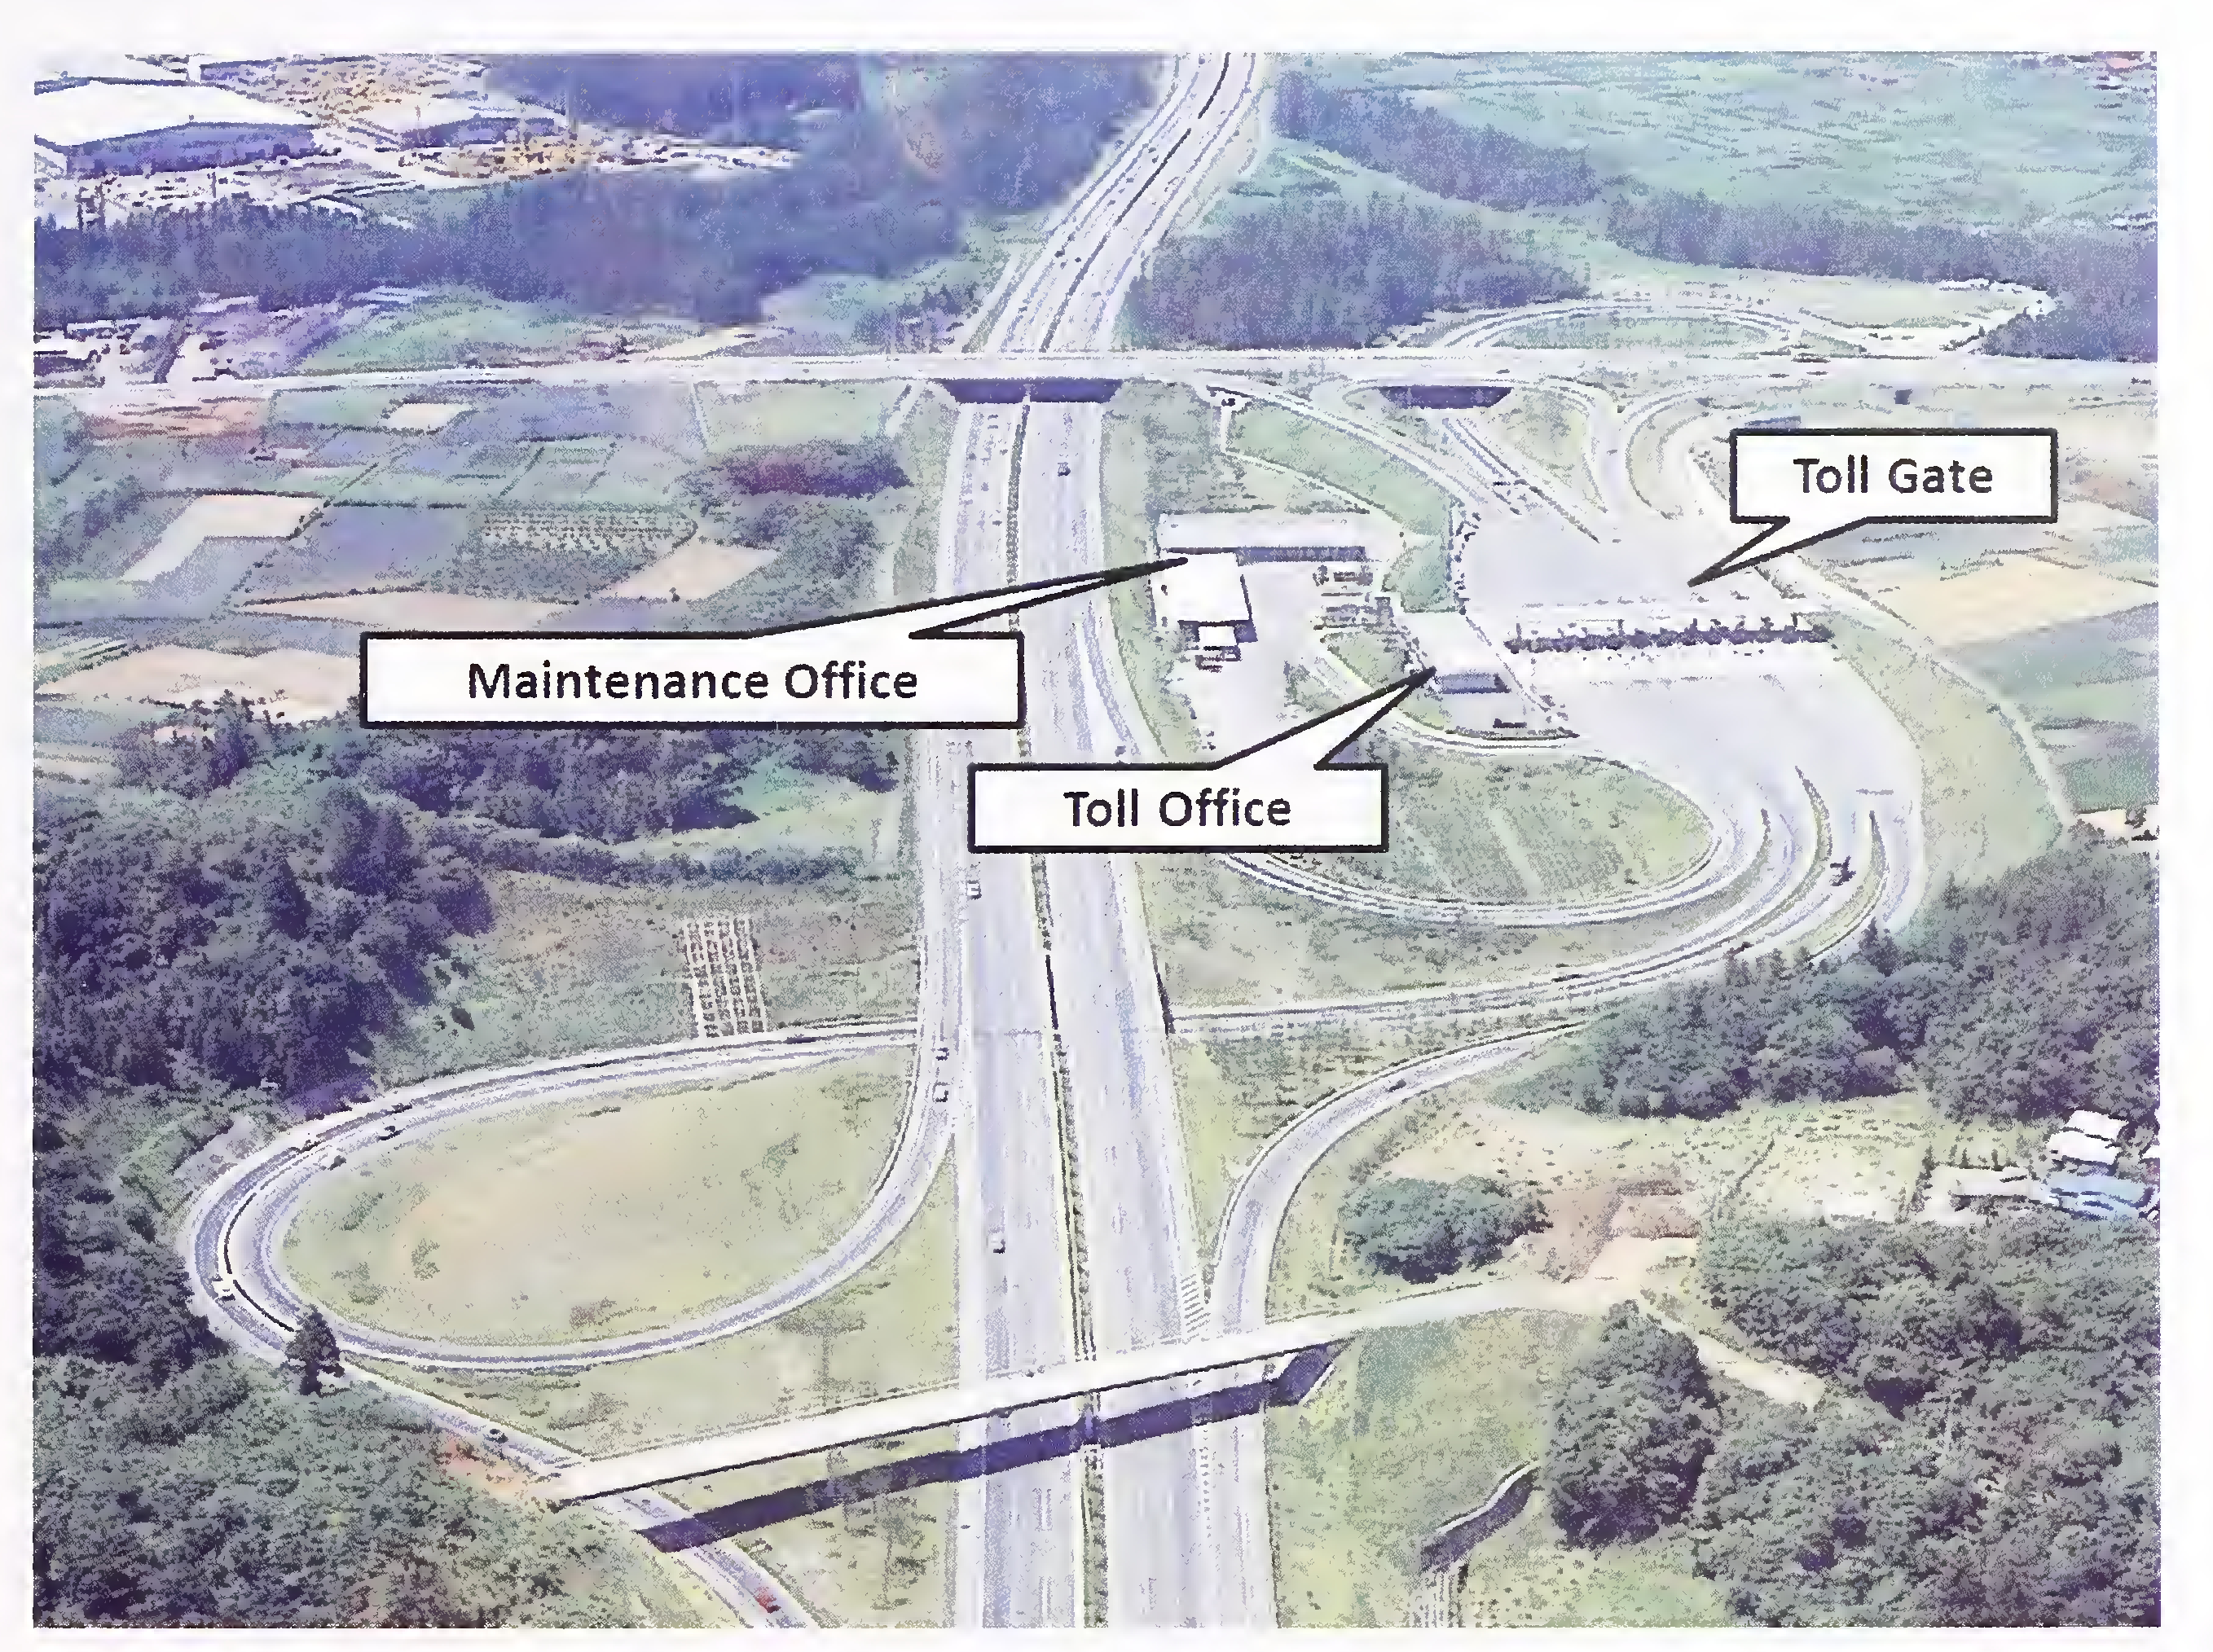 Fig. 12.1 Typical Location of Toll plaza, Toll Office, and Maintenance Office at Trumpet-type Interchange